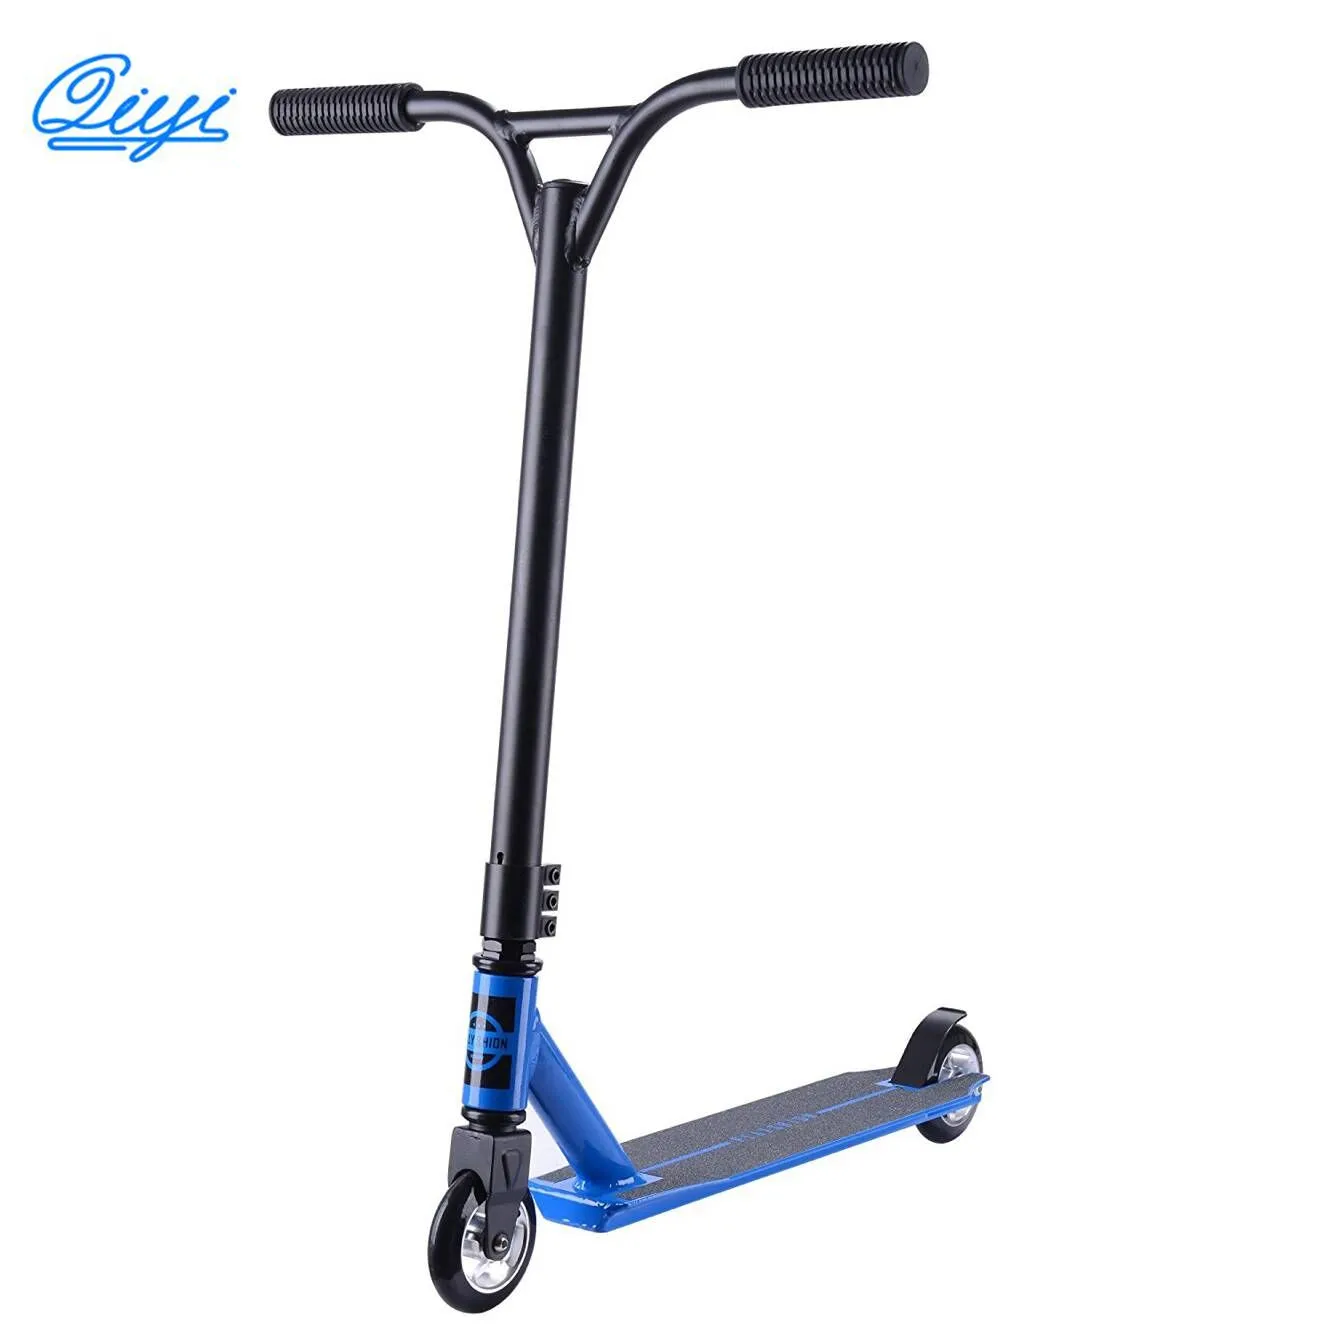 

Fashionable adult stunt scooter kids kick play aluminium body scooters for teenagers